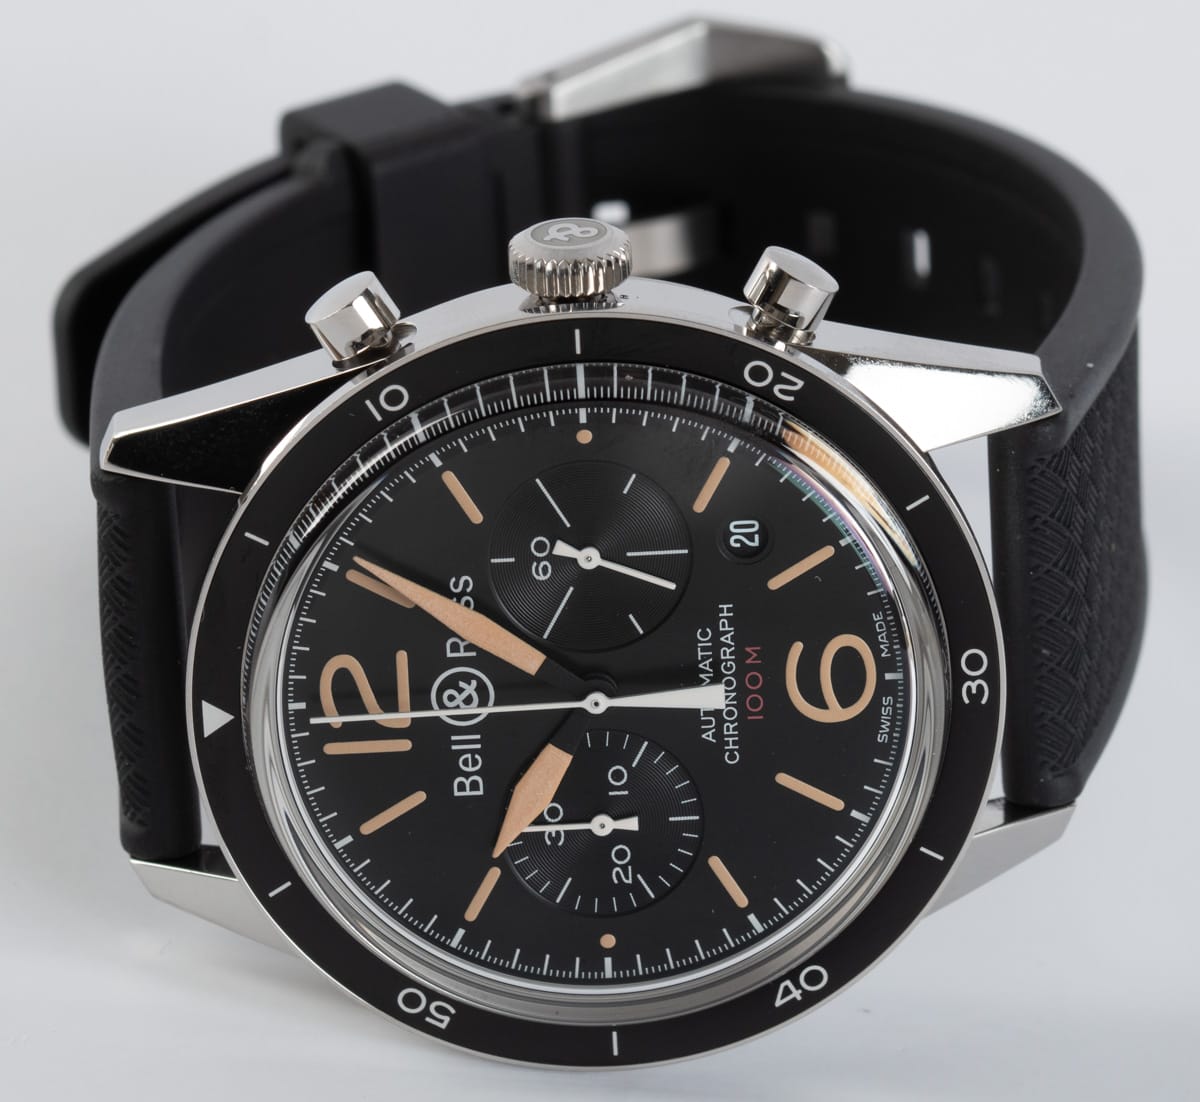 Front View of BR 126 Sport Heritage Chrono